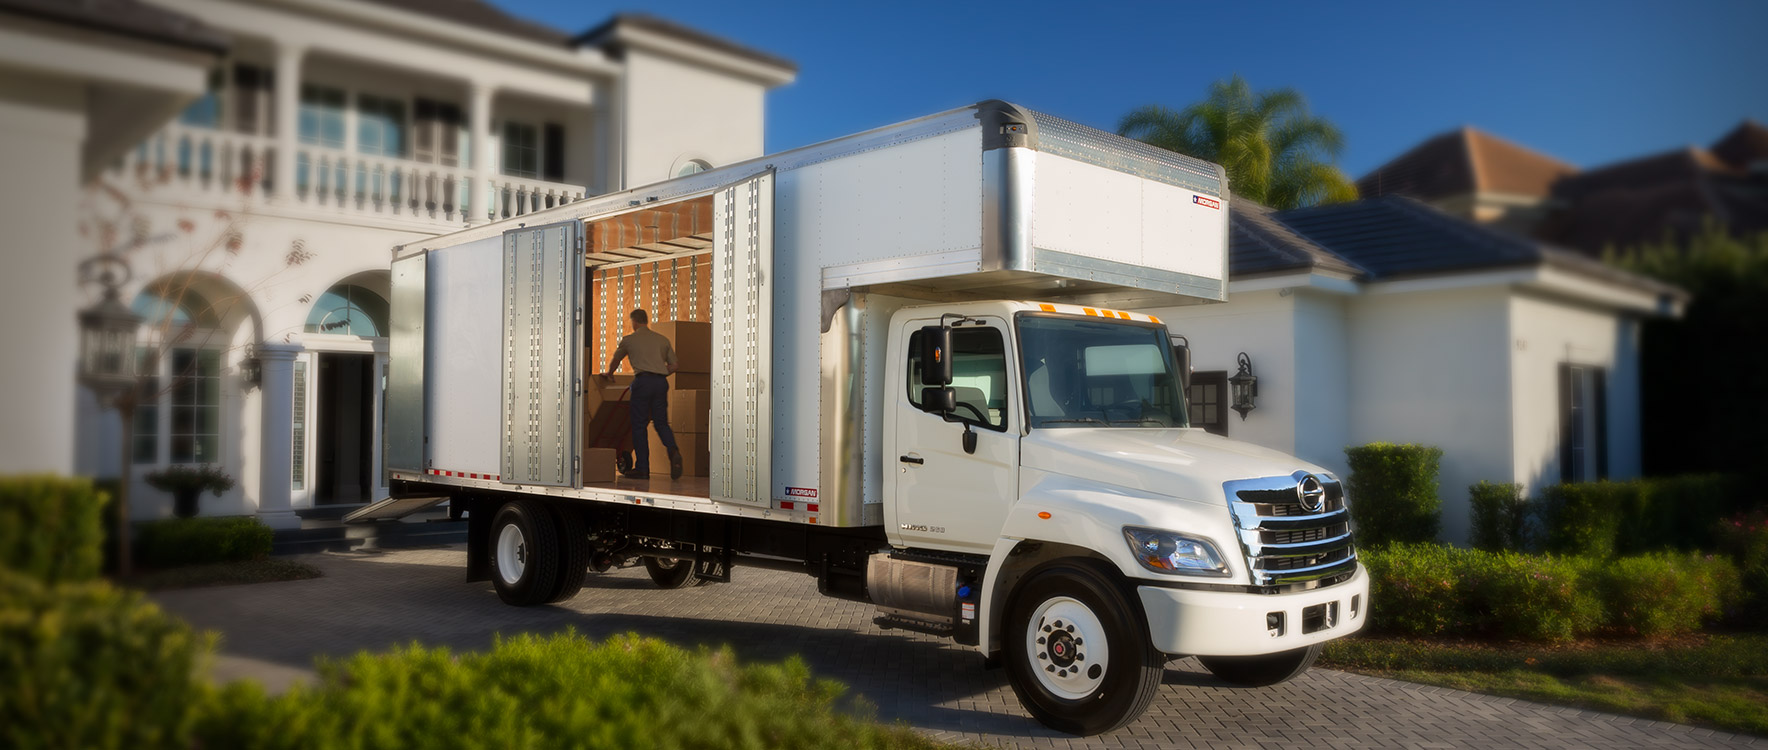 Dry Freight Furniture Mover unloading boxes at a home - Morgan moving truck bodies